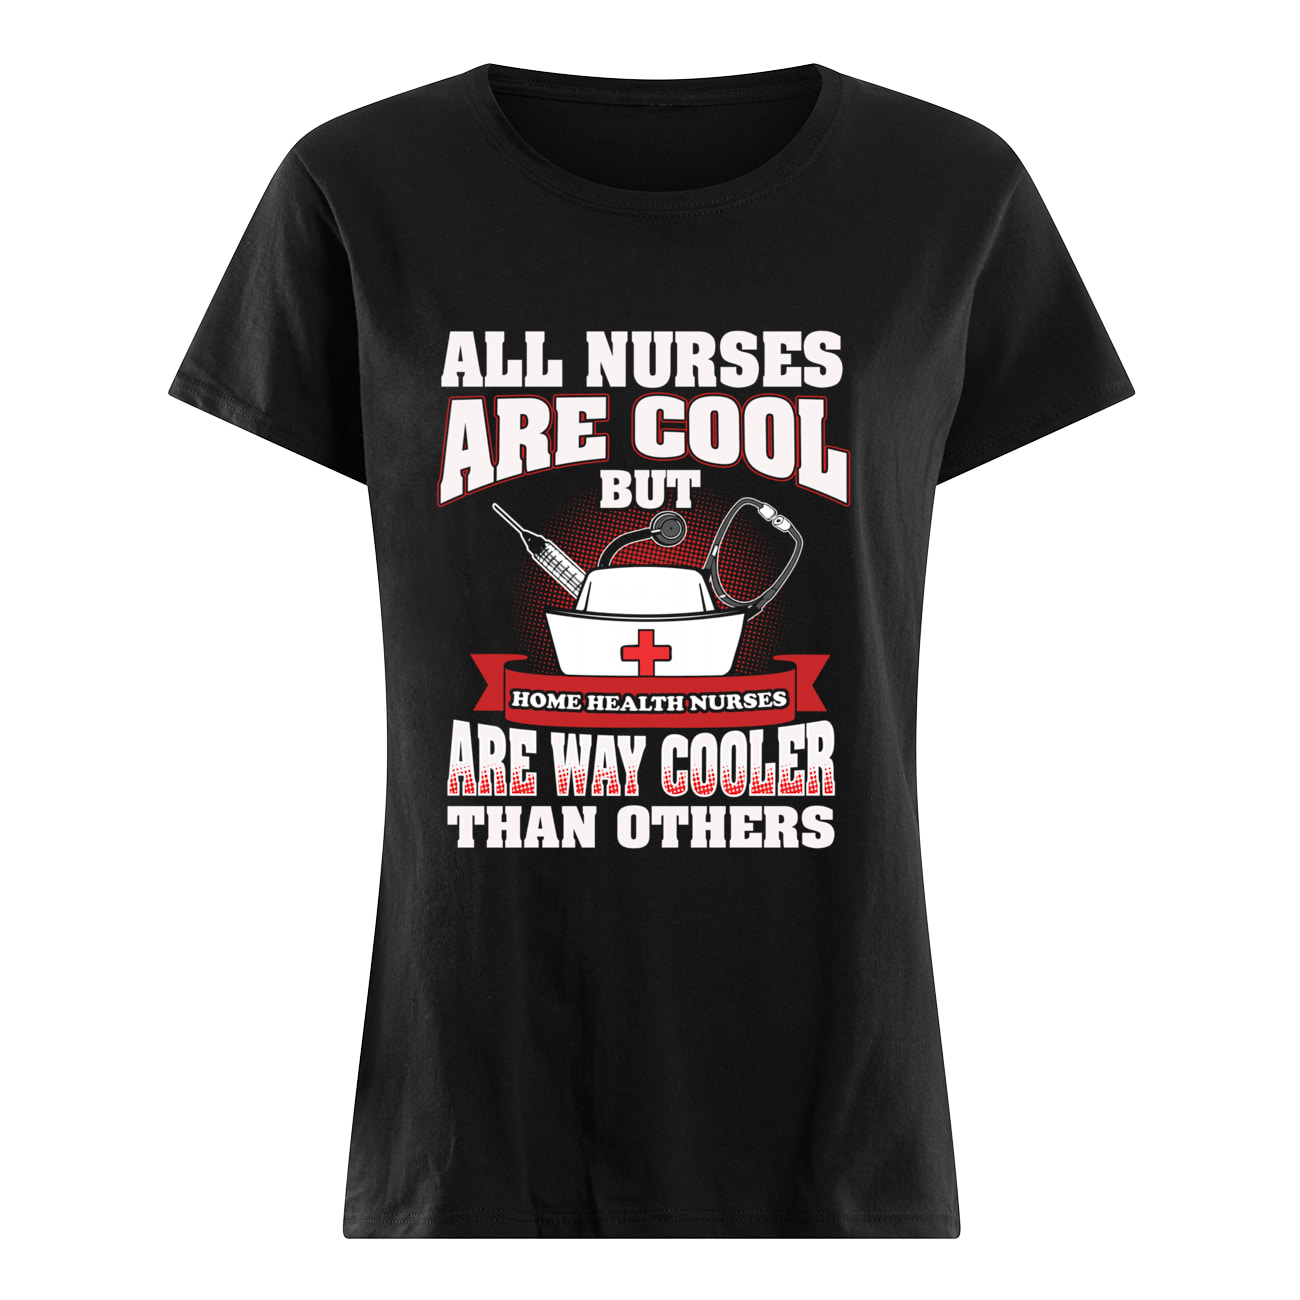 All Nurses Are Cool But Are Way Cooler Than Others Shirt